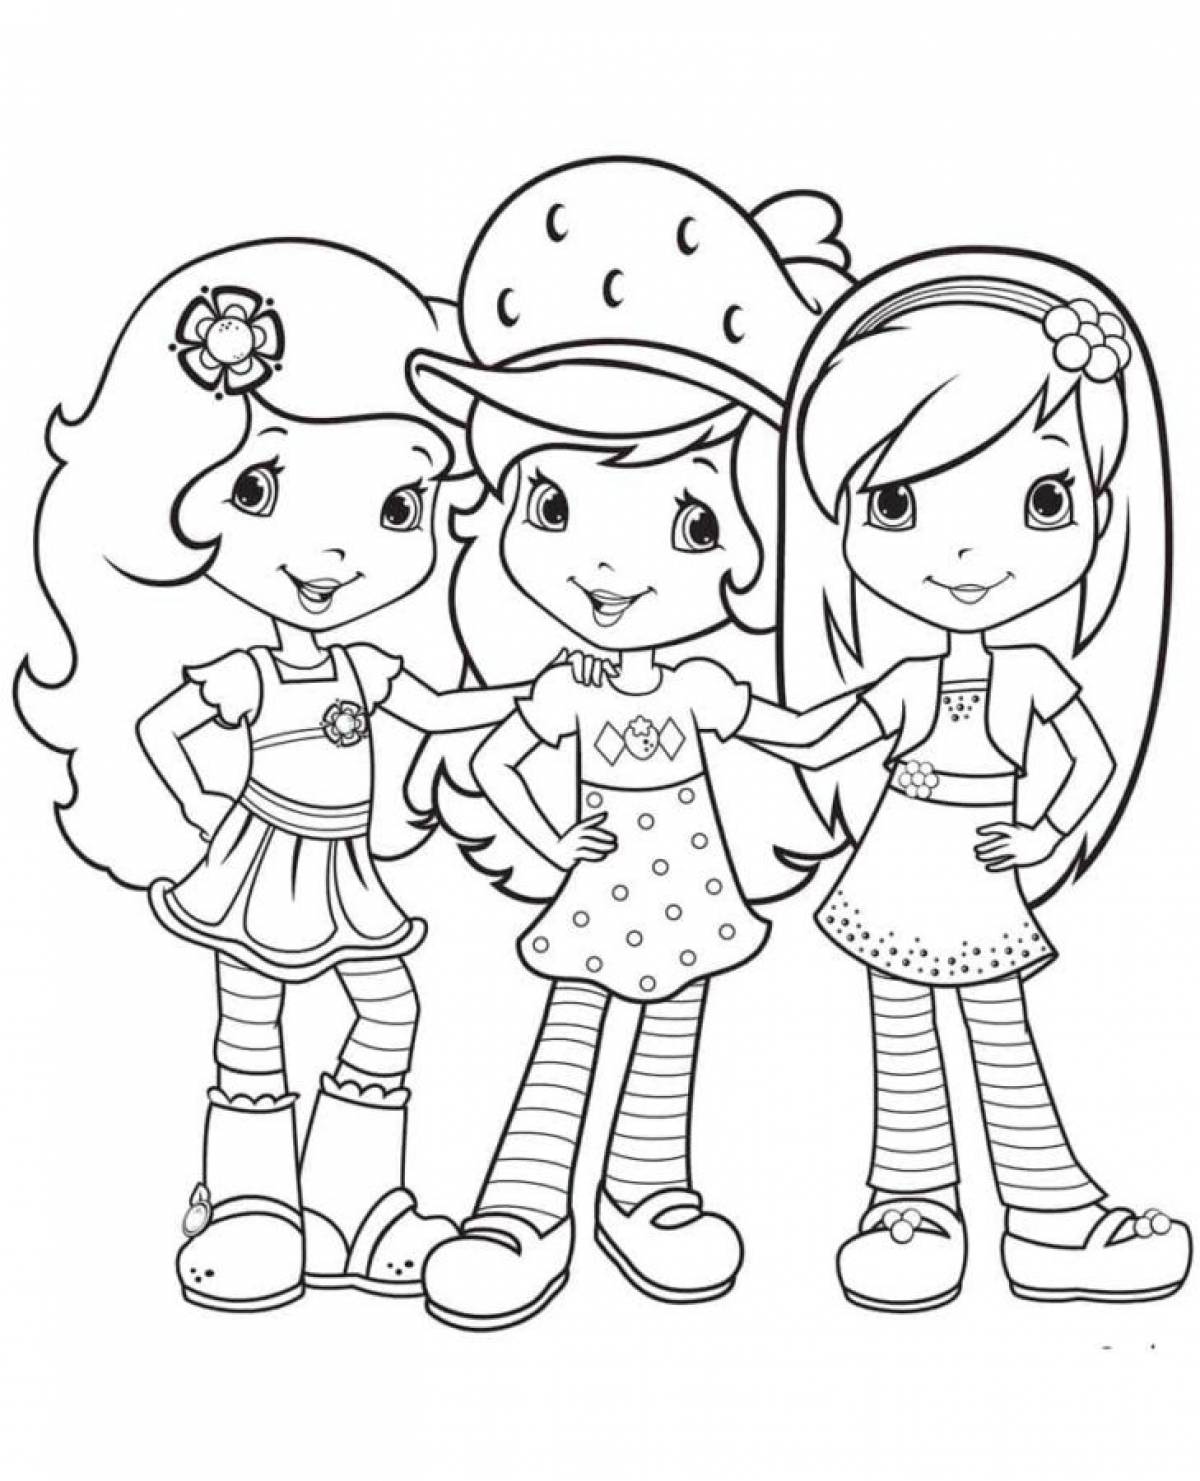 Color-splash coloring page for girls all